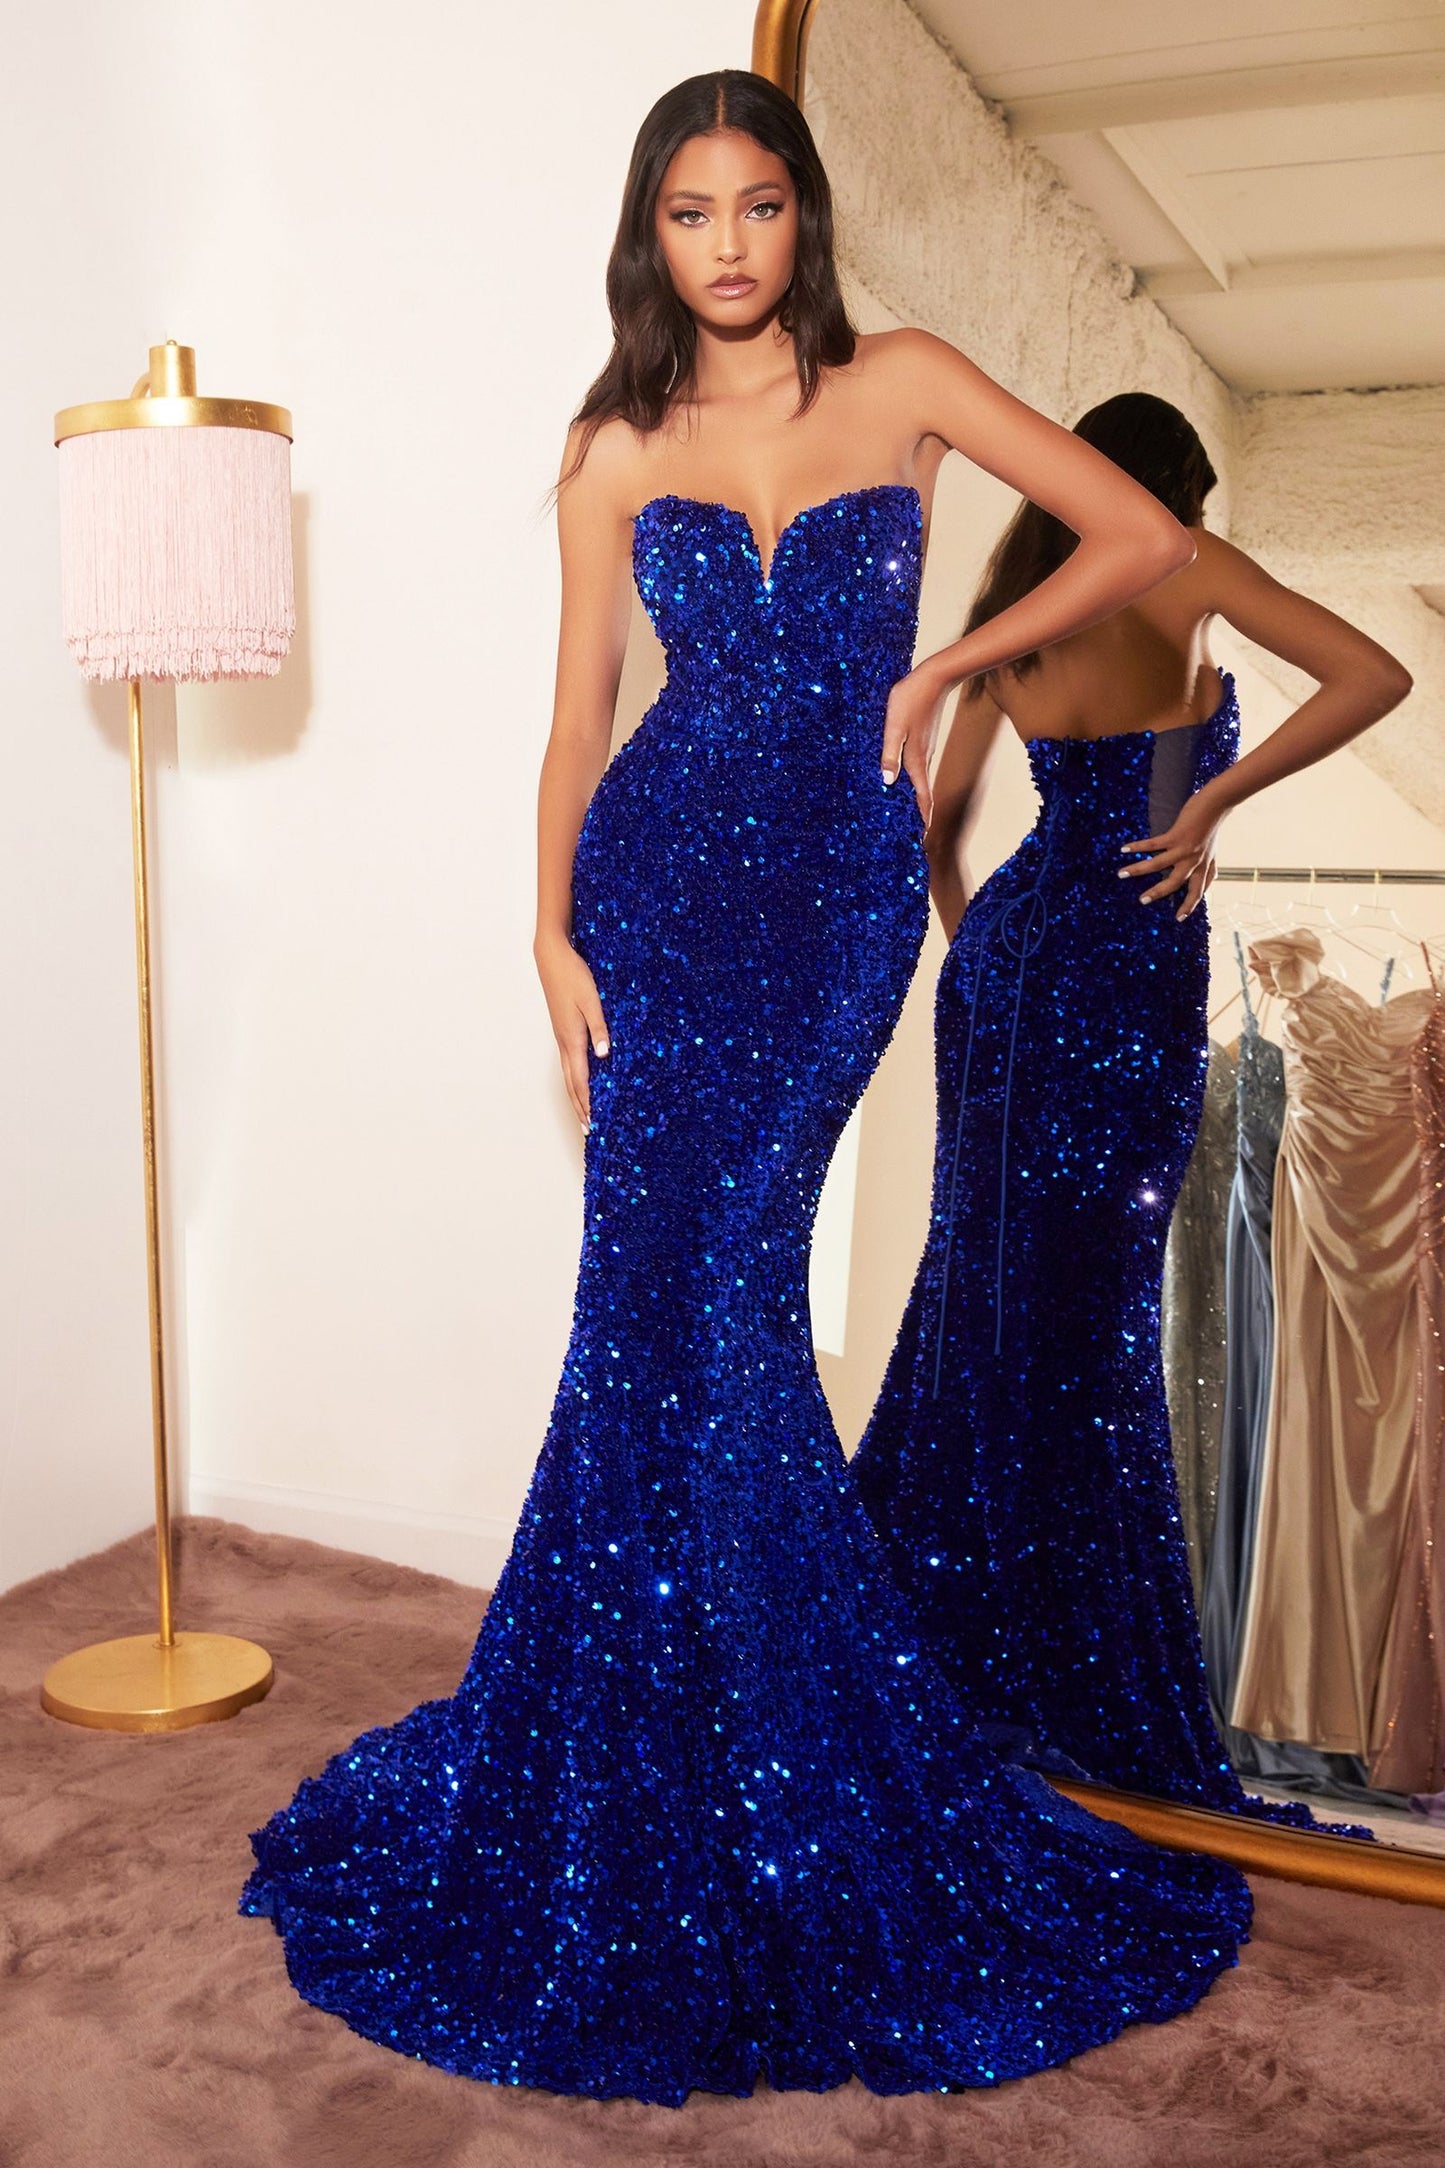 The Martina Strapless Sequin Evening Gown with Sweetheart Neckline